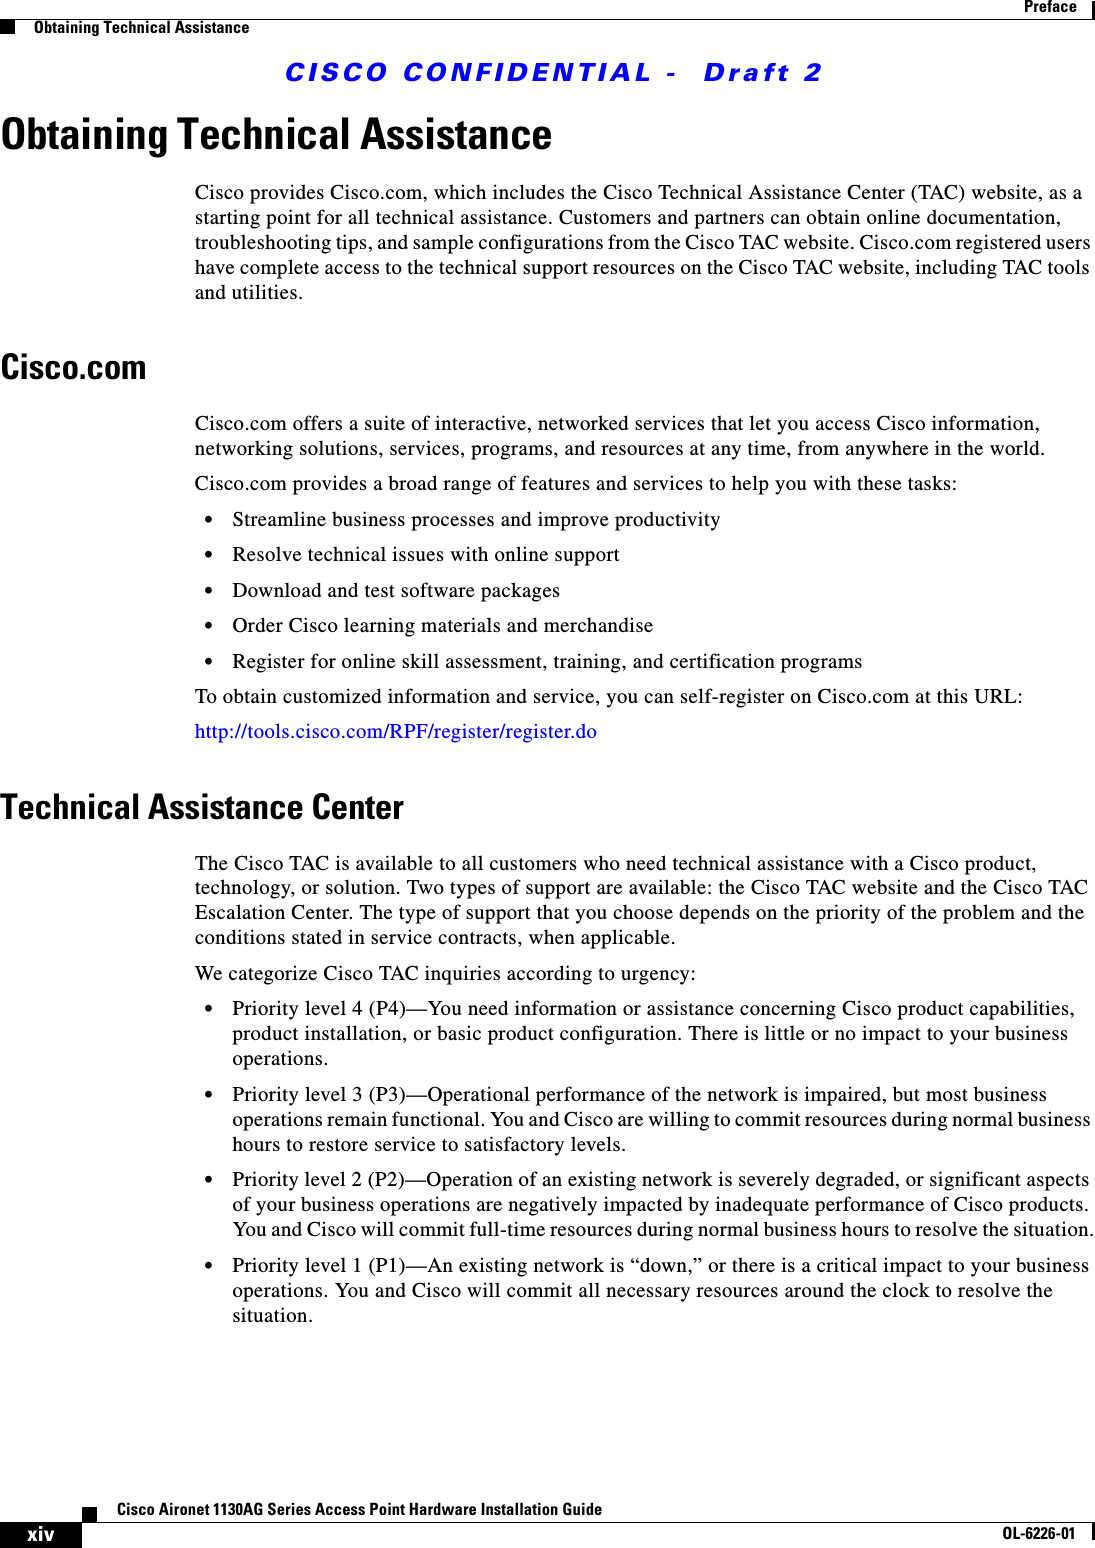  CISCO CONFIDENTIAL -  Draft 2xivCisco Aironet 1130AG Series Access Point Hardware Installation GuideOL-6226-01PrefaceObtaining Technical AssistanceObtaining Technical AssistanceCisco provides Cisco.com, which includes the Cisco Technical Assistance Center (TAC) website, as a starting point for all technical assistance. Customers and partners can obtain online documentation, troubleshooting tips, and sample configurations from the Cisco TAC website. Cisco.com registered users have complete access to the technical support resources on the Cisco TAC website, including TAC tools and utilities. Cisco.comCisco.com offers a suite of interactive, networked services that let you access Cisco information, networking solutions, services, programs, and resources at any time, from anywhere in the world. Cisco.com provides a broad range of features and services to help you with these tasks:•Streamline business processes and improve productivity •Resolve technical issues with online support•Download and test software packages•Order Cisco learning materials and merchandise•Register for online skill assessment, training, and certification programsTo obtain customized information and service, you can self-register on Cisco.com at this URL:http://tools.cisco.com/RPF/register/register.doTechnical Assistance CenterThe Cisco TAC is available to all customers who need technical assistance with a Cisco product, technology, or solution. Two types of support are available: the Cisco TAC website and the Cisco TAC Escalation Center. The type of support that you choose depends on the priority of the problem and the conditions stated in service contracts, when applicable.We categorize Cisco TAC inquiries according to urgency:•Priority level 4 (P4)—You need information or assistance concerning Cisco product capabilities, product installation, or basic product configuration. There is little or no impact to your business operations.•Priority level 3 (P3)—Operational performance of the network is impaired, but most business operations remain functional. You and Cisco are willing to commit resources during normal business hours to restore service to satisfactory levels.•Priority level 2 (P2)—Operation of an existing network is severely degraded, or significant aspects of your business operations are negatively impacted by inadequate performance of Cisco products. You and Cisco will commit full-time resources during normal business hours to resolve the situation.•Priority level 1 (P1)—An existing network is “down,” or there is a critical impact to your business operations. You and Cisco will commit all necessary resources around the clock to resolve the situation.